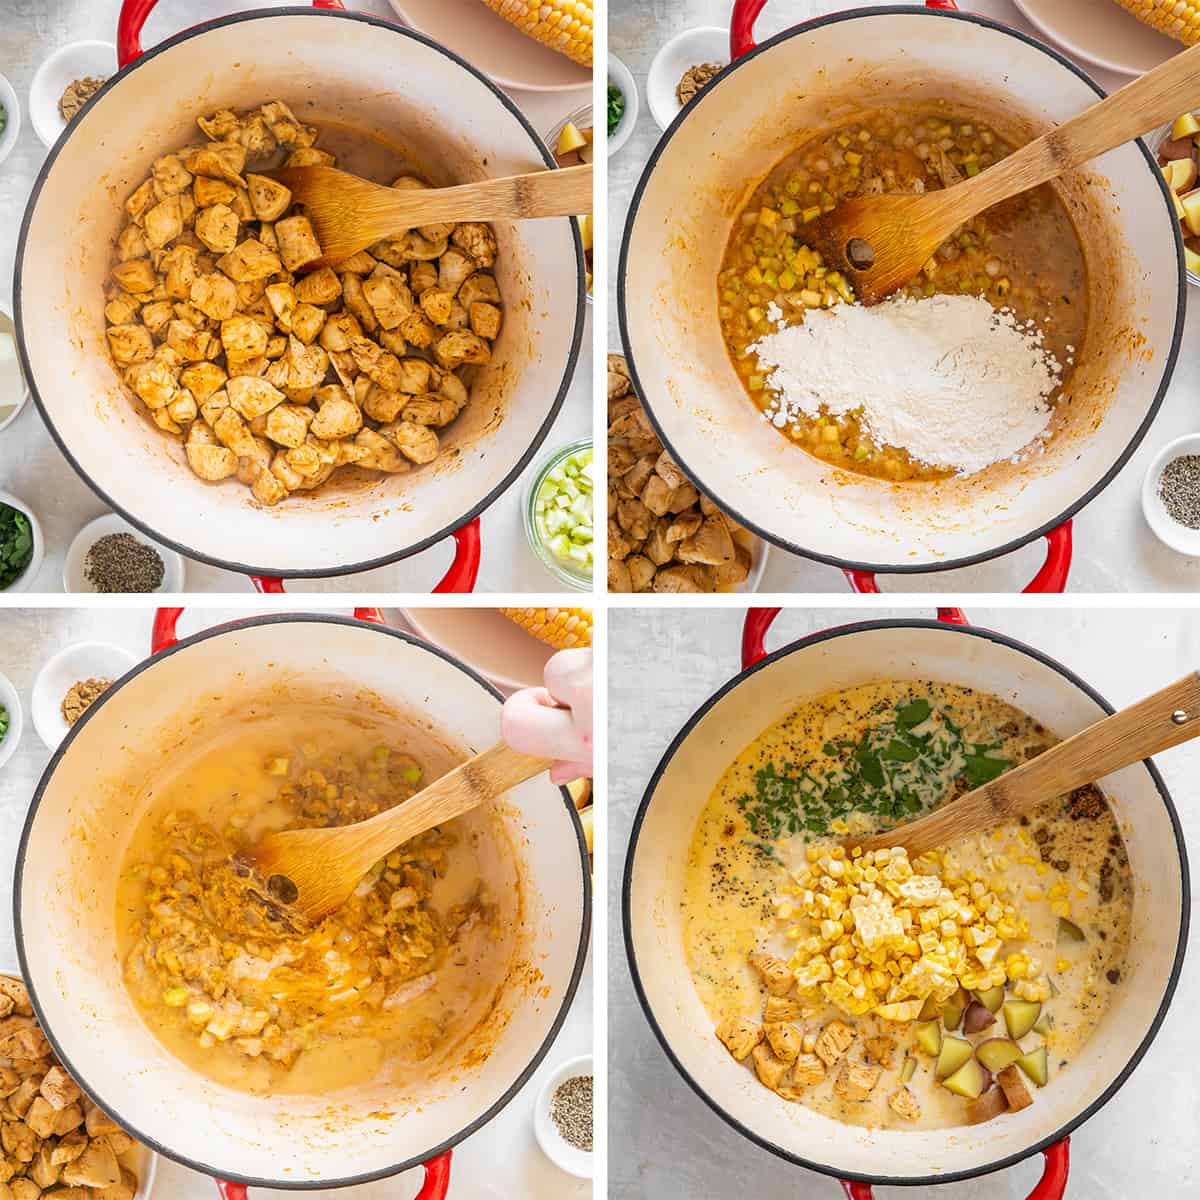 Four images of chicken and other ingredients in a Dutch oven with a wooden spoon.